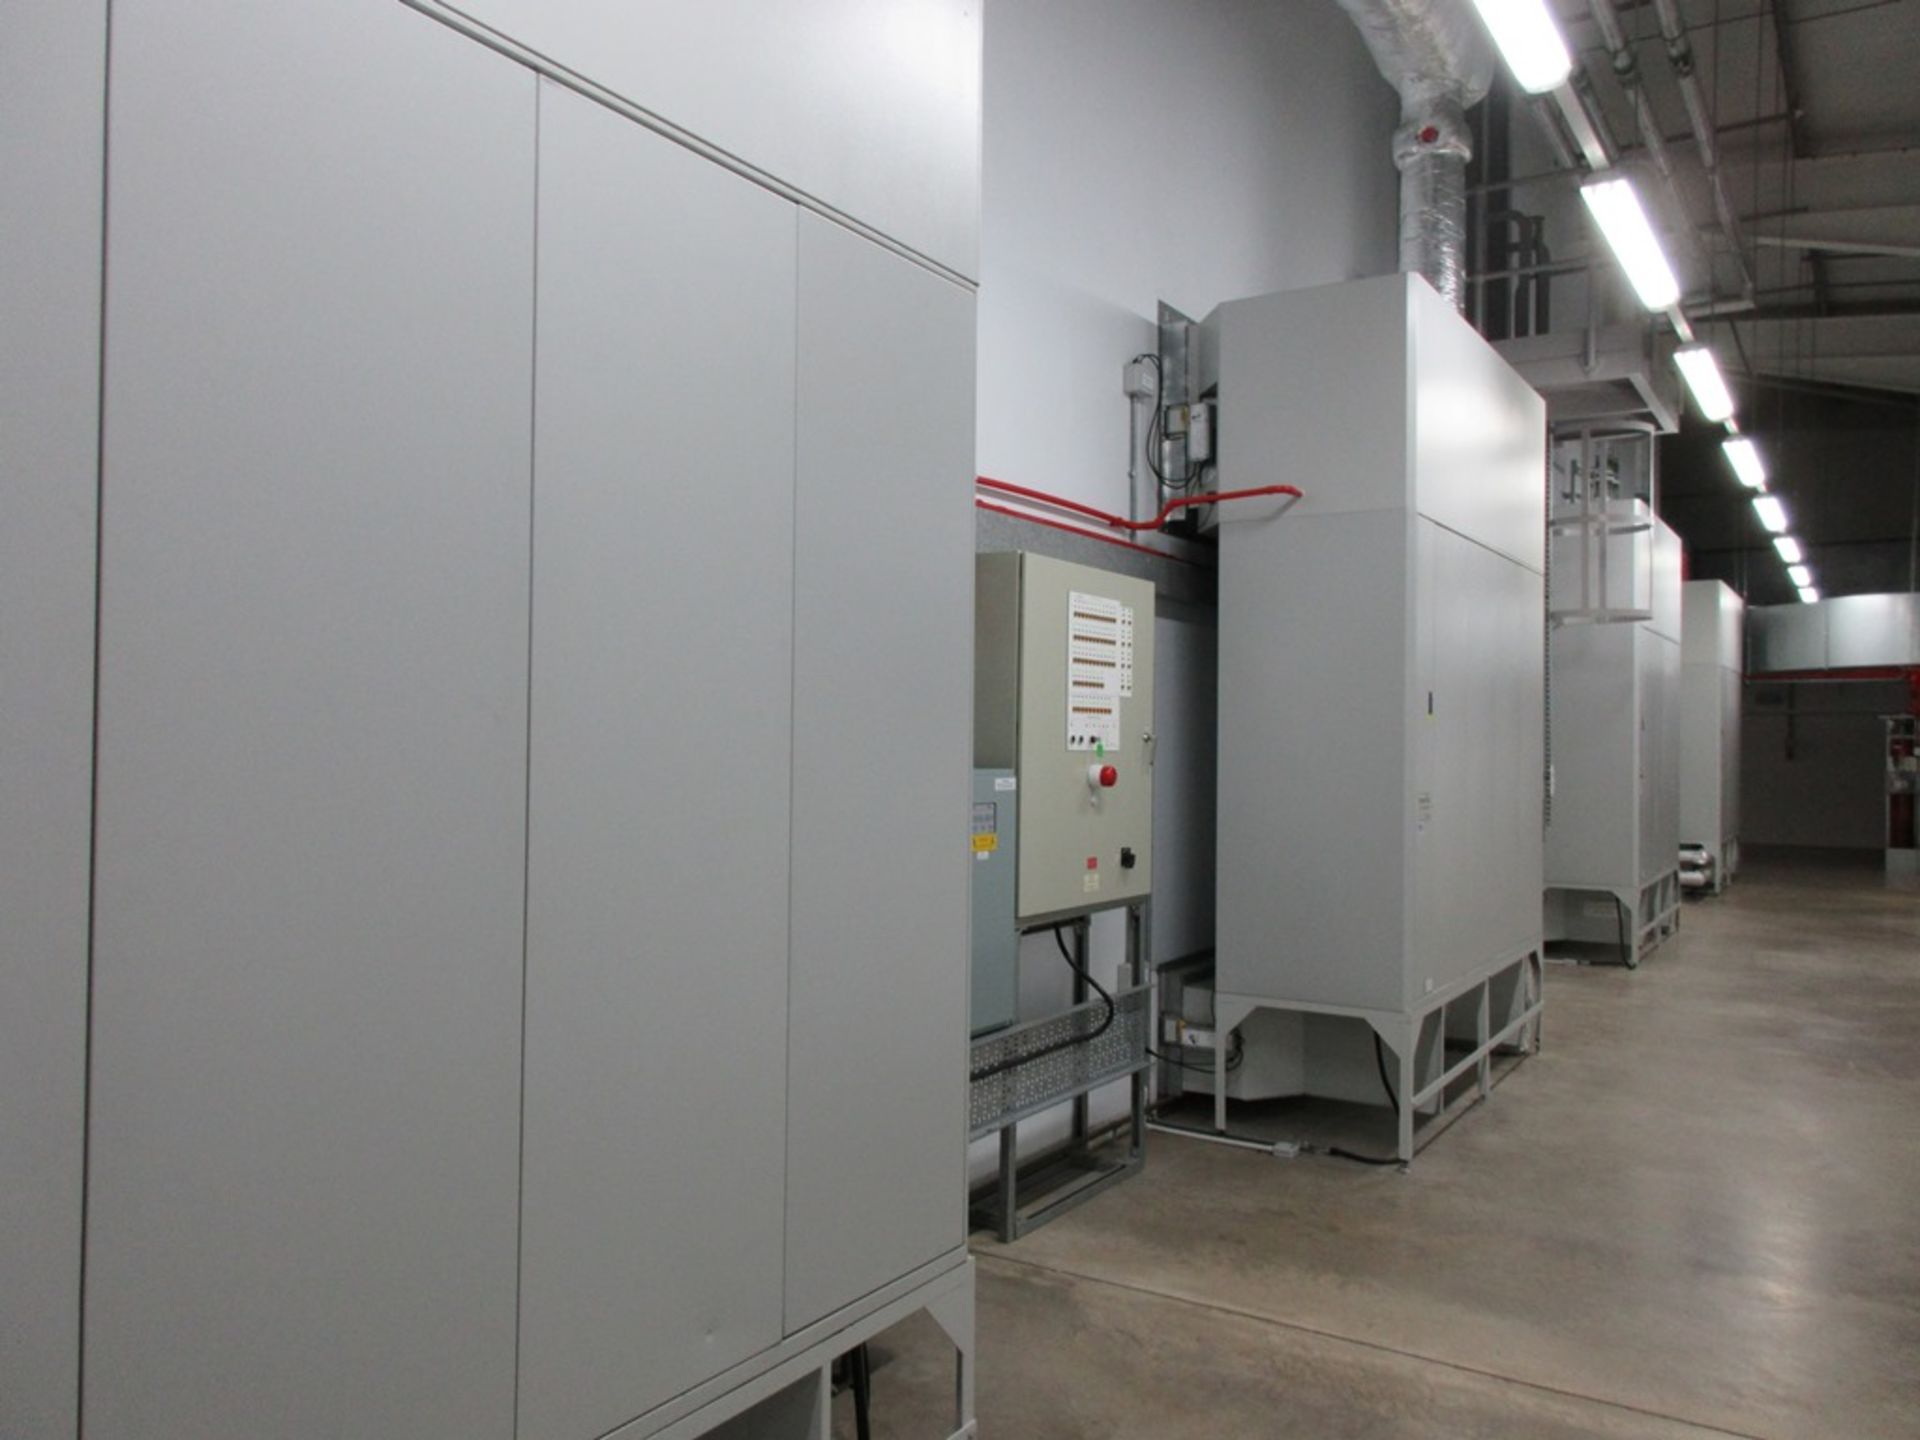 The computer room air conditioning [CRAC] air handling system throughout including - Image 18 of 30